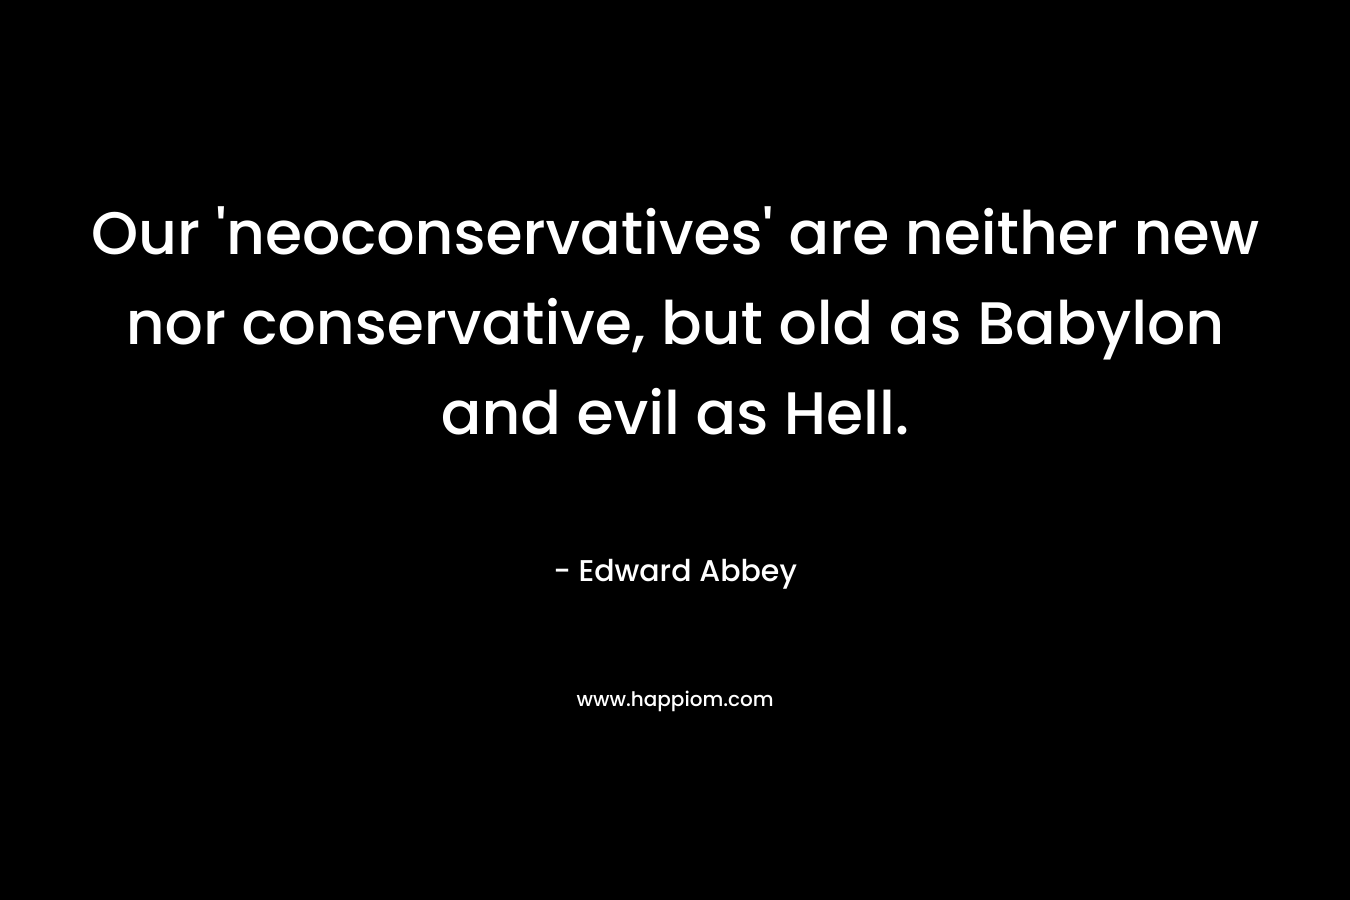 Our ‘neoconservatives’ are neither new nor conservative, but old as Babylon and evil as Hell. – Edward Abbey